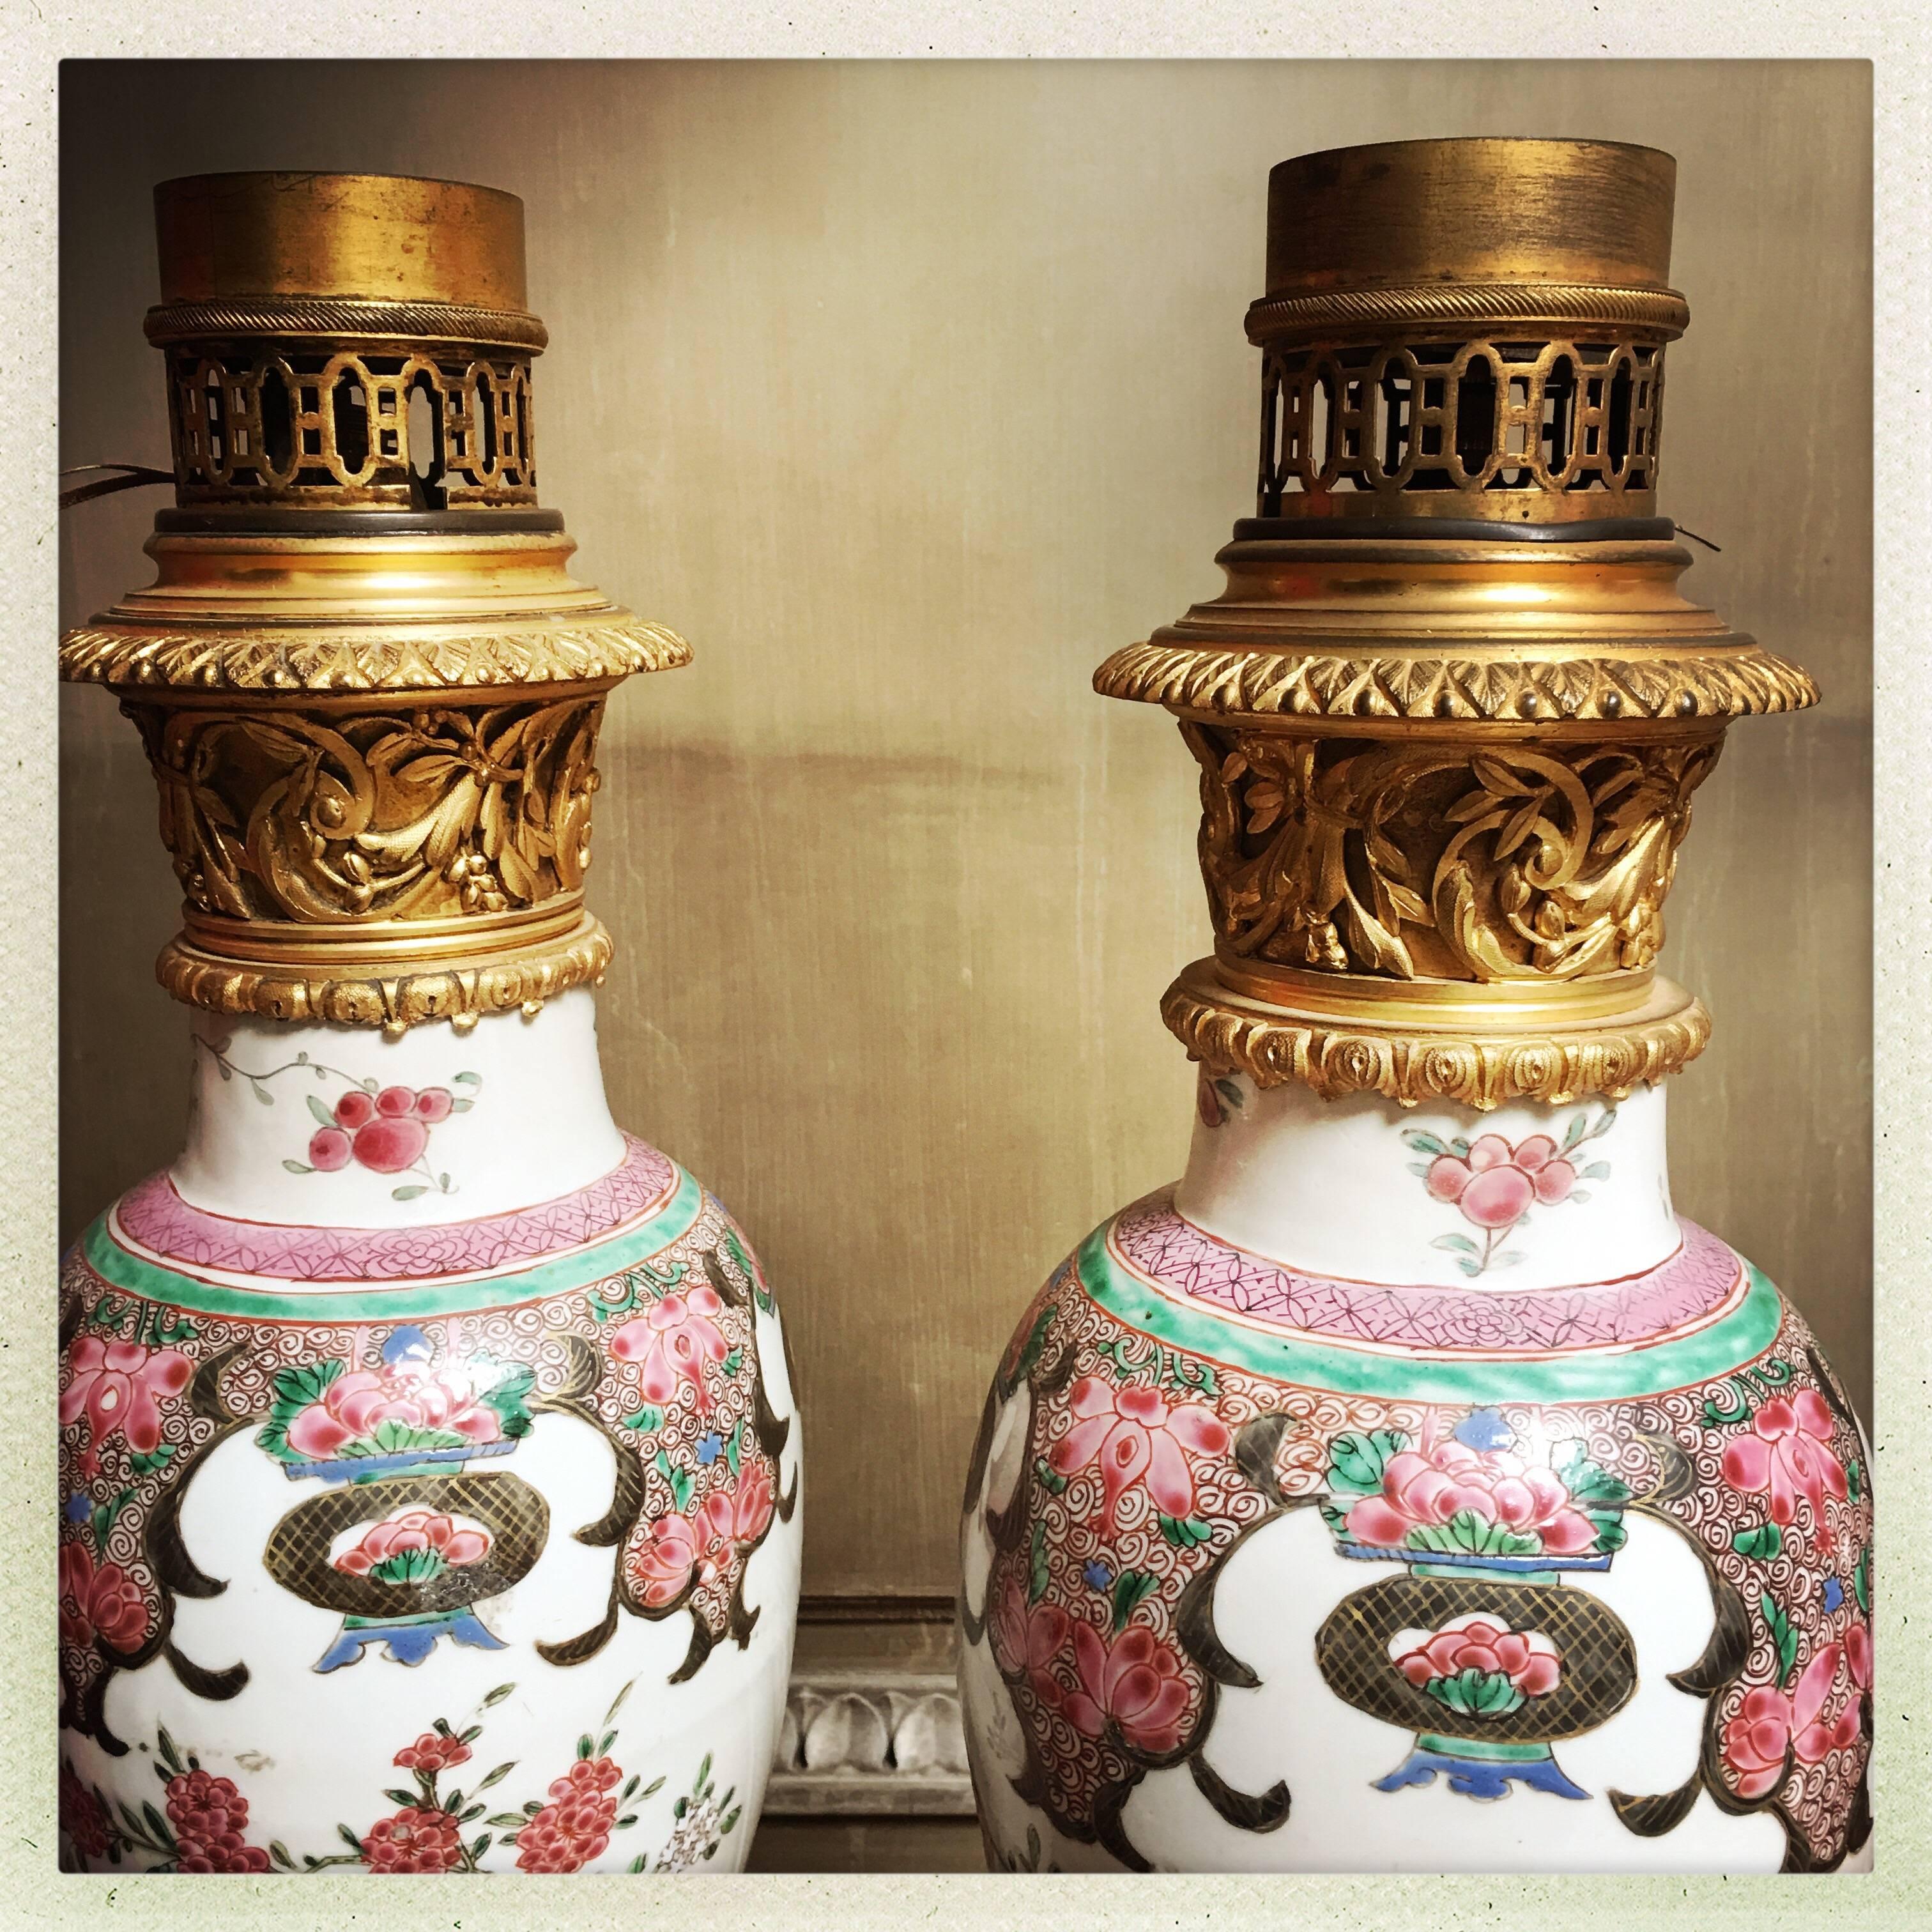 A pair of Chinese Export porcelain lamp bases mounted in French Louis XVI style bronze dore.